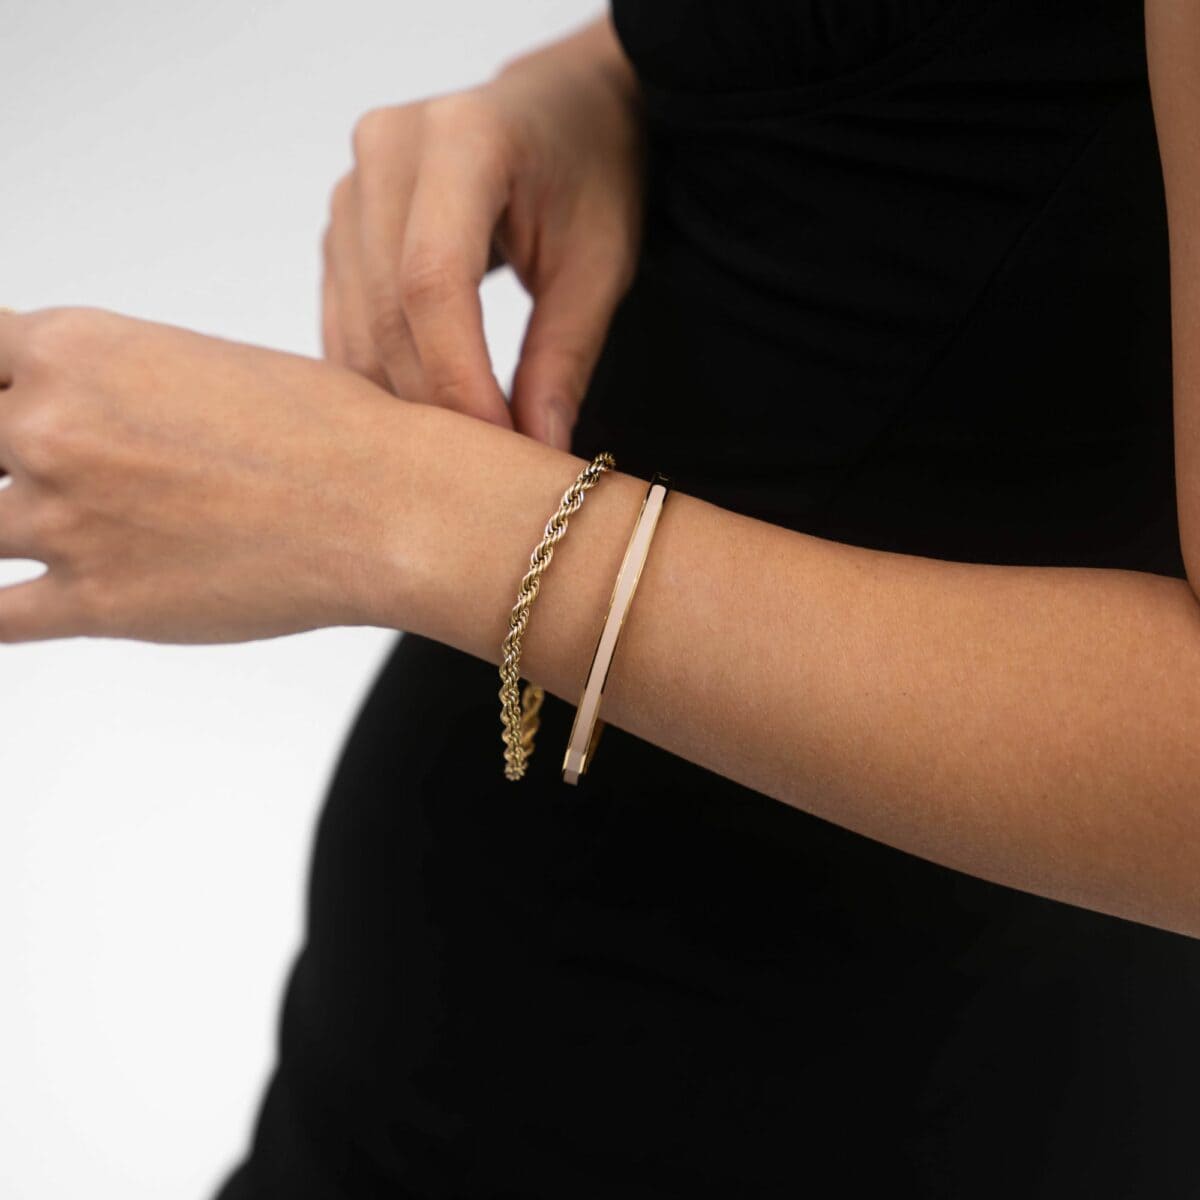 https://m.clubbella.co/product/14k-gold-plated-rope-chain-bracelet/ DSC00050